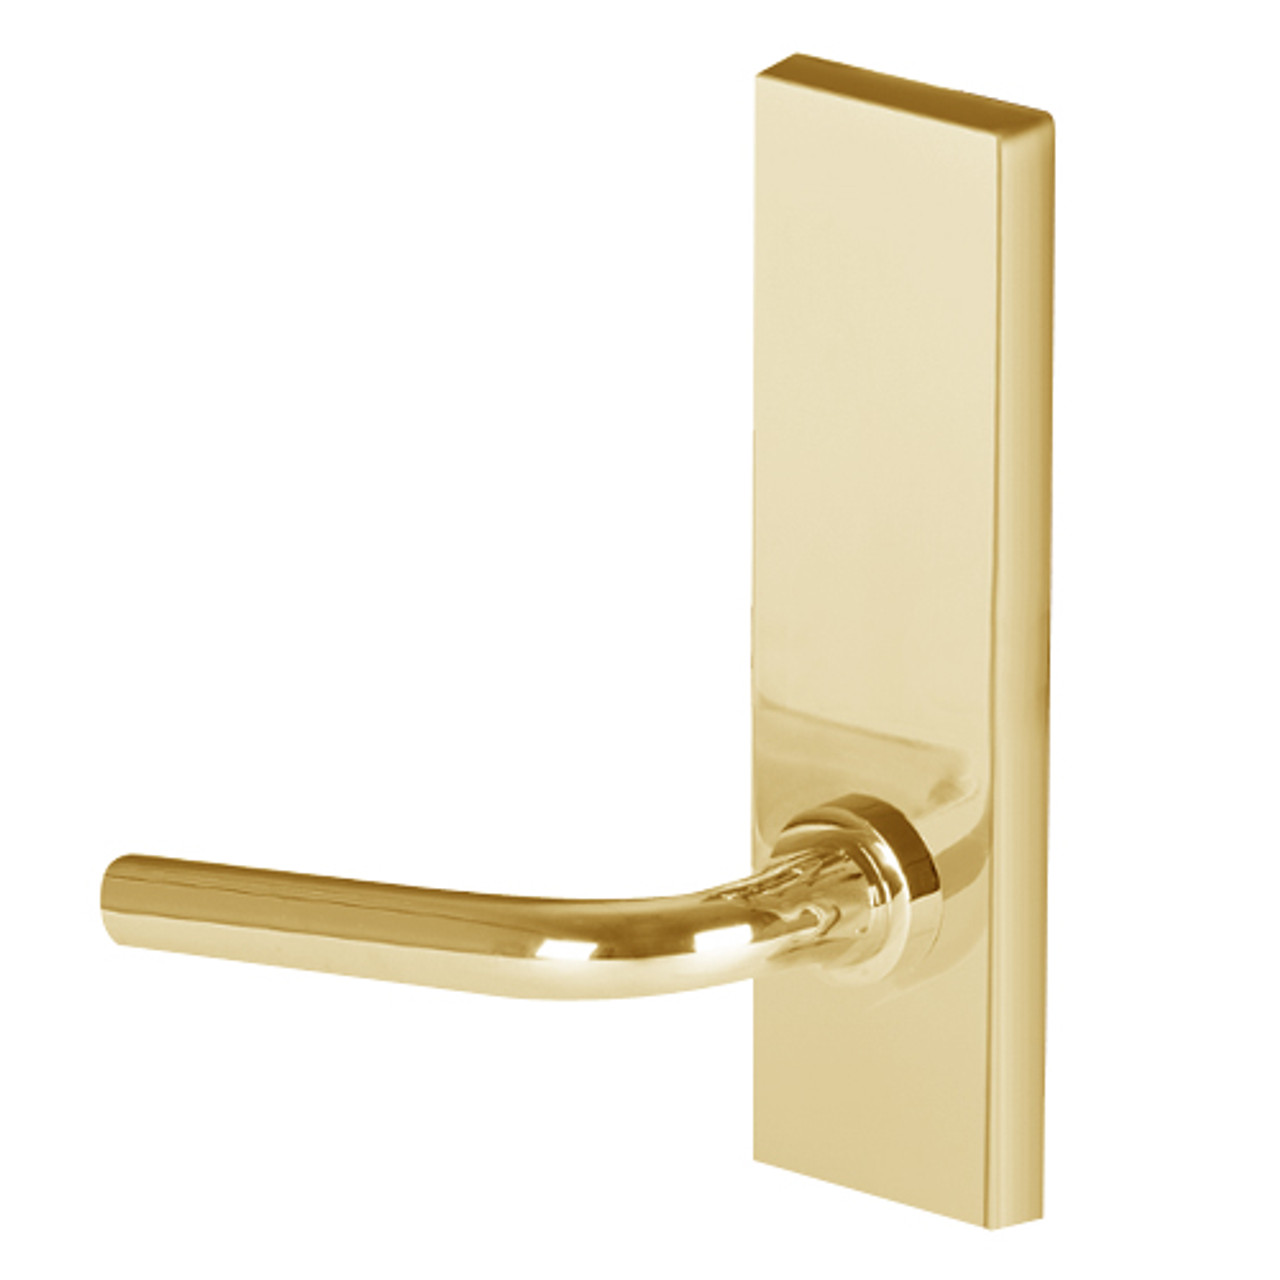 45H0LB12M605 Best 40H Series Privacy with Deadbolt Heavy Duty Mortise Lever Lock with Solid Tube with No Return in Bright Brass